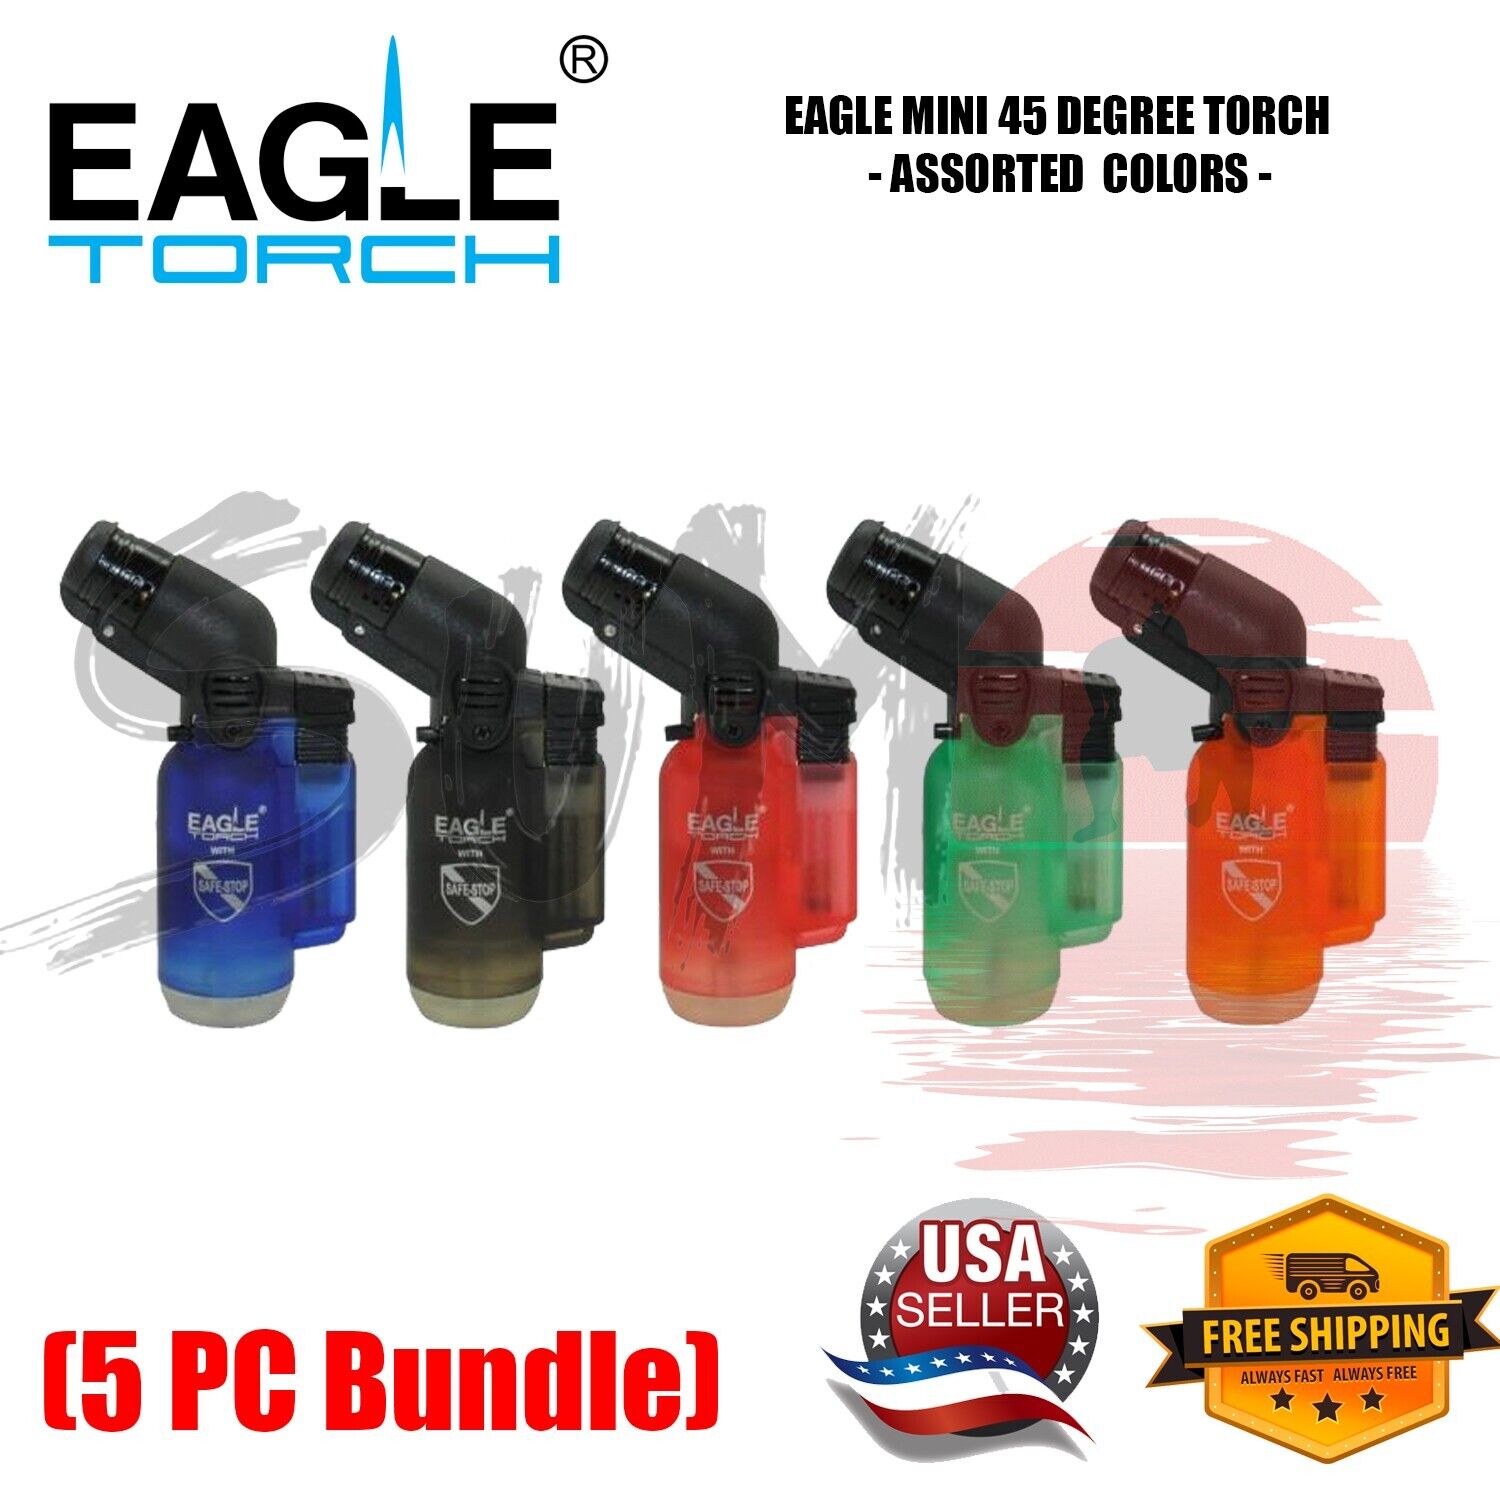 5 Pack Eagle Torch 45 Degree Jet Flame Refillable Torch Lighter Assorted Colors